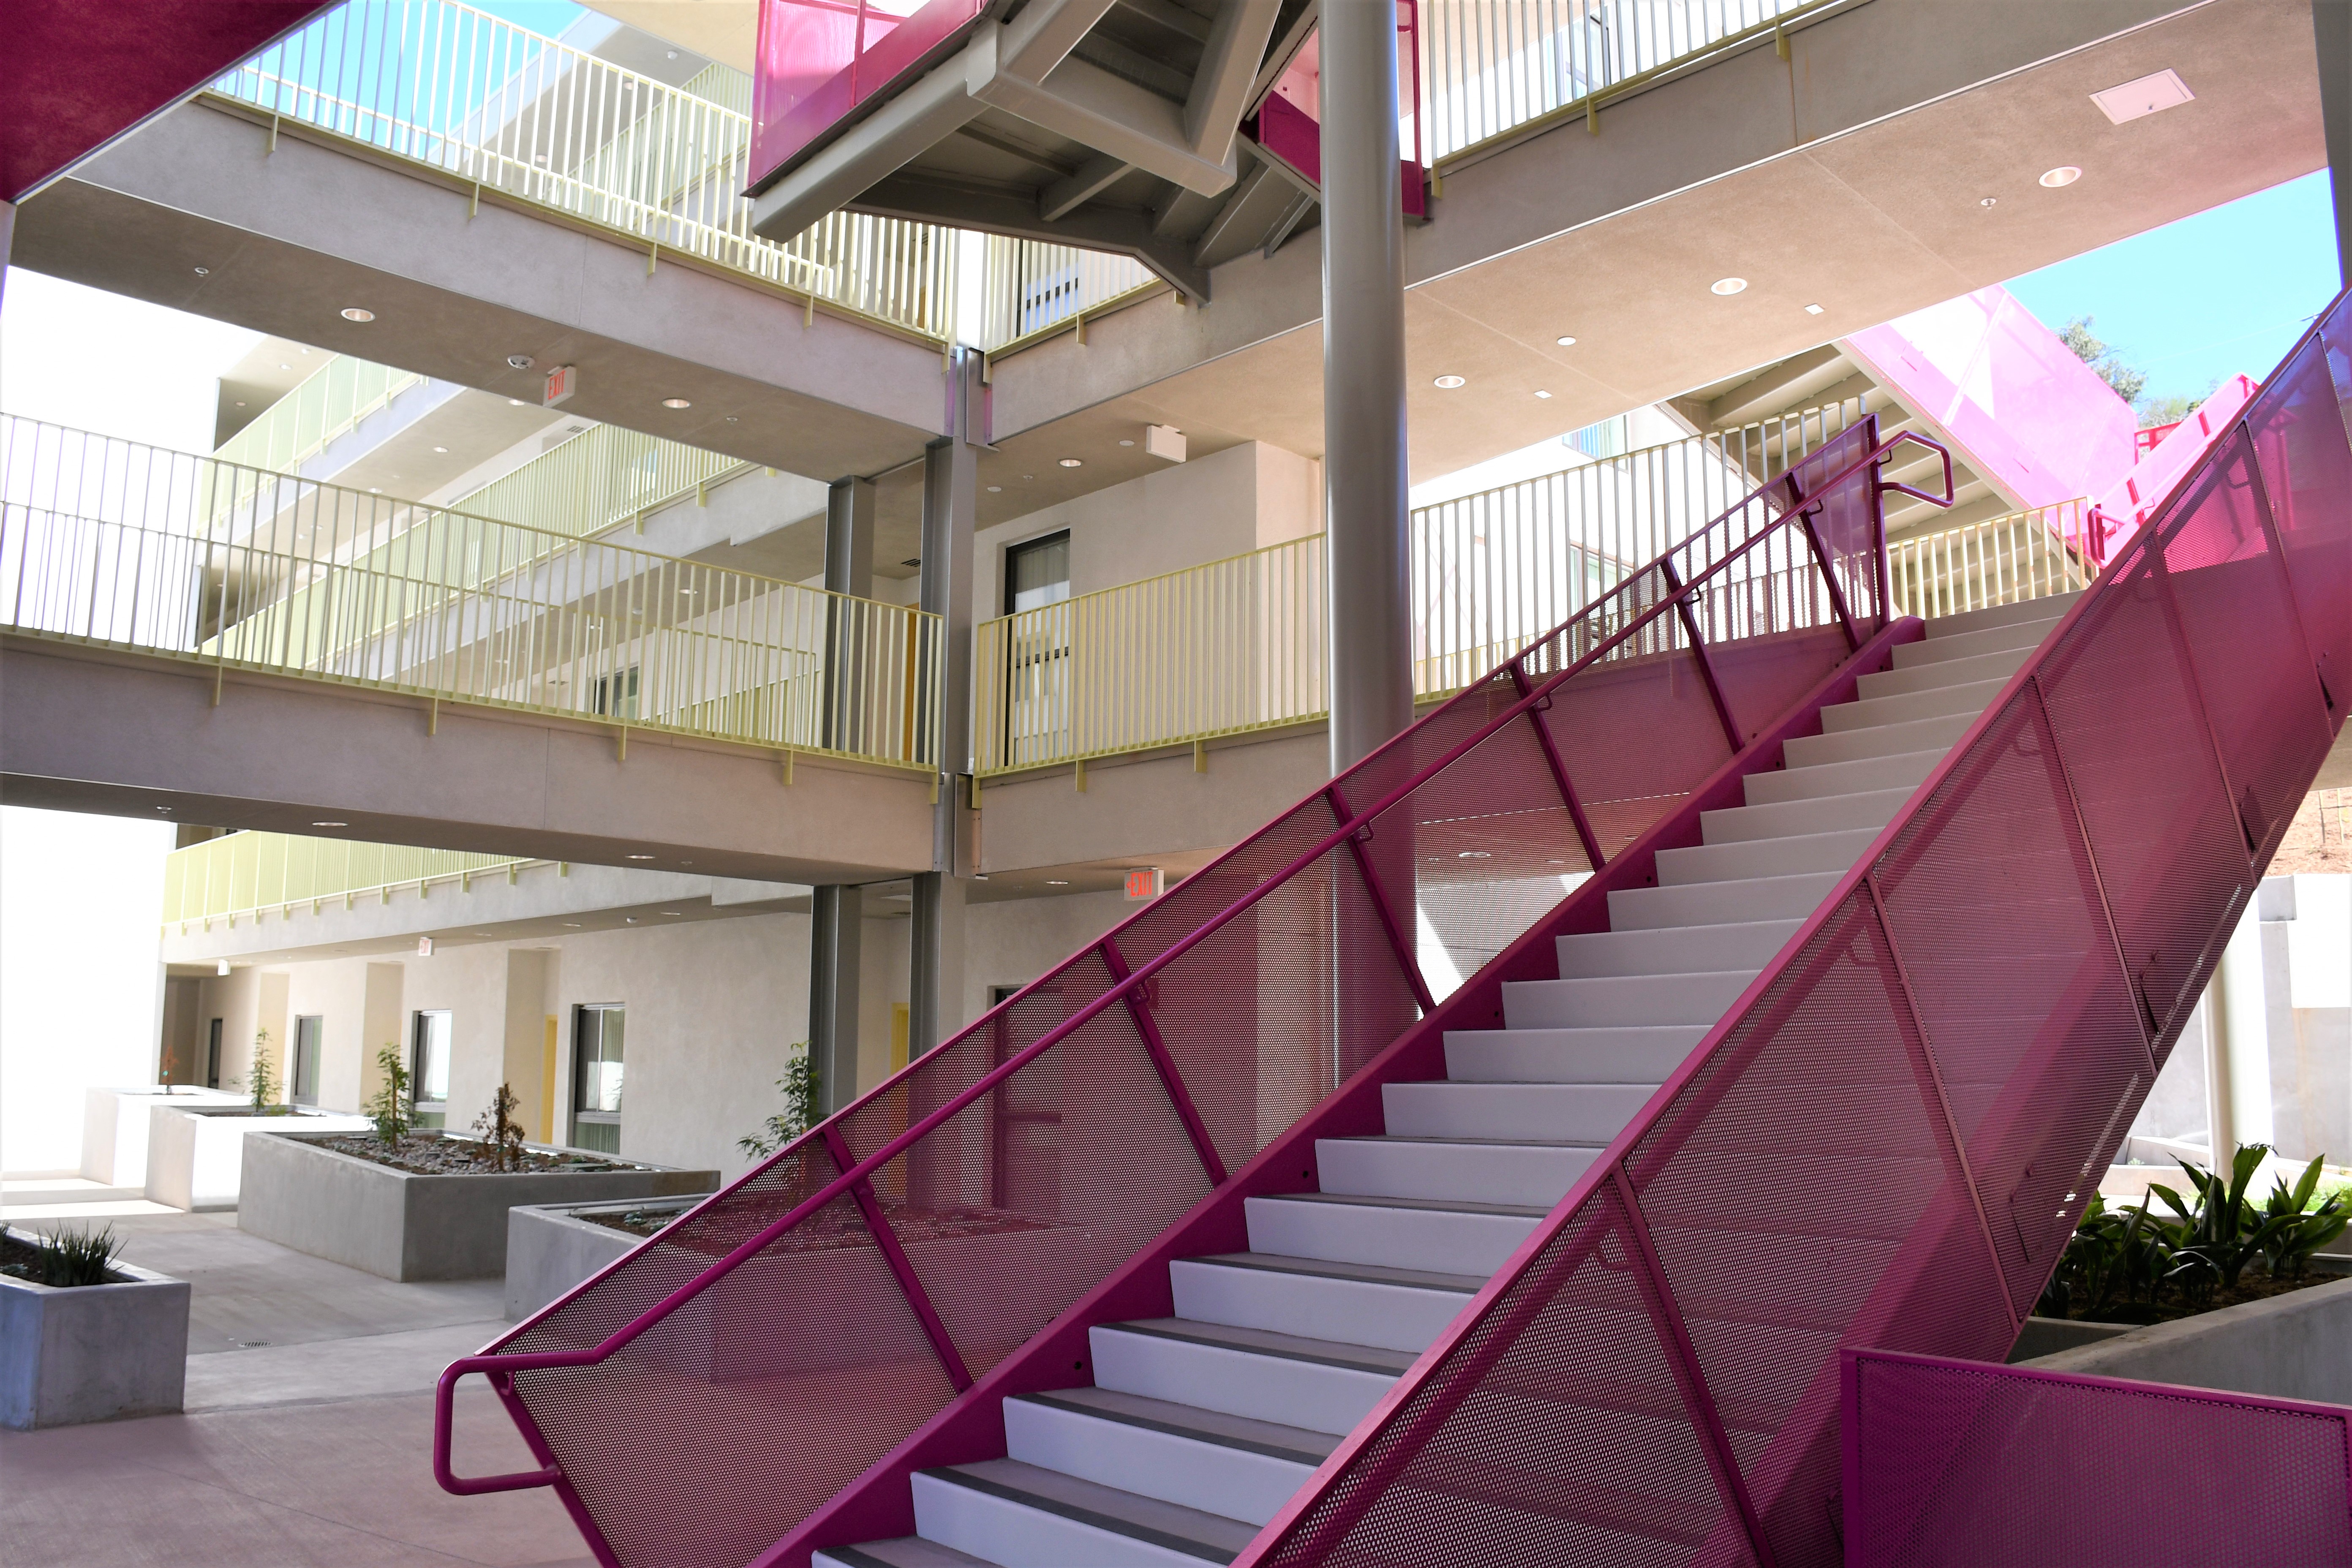 Purple stairs lead to the higher levels of the property. Upper levels have green railing. Ground floor has planters on the far end.